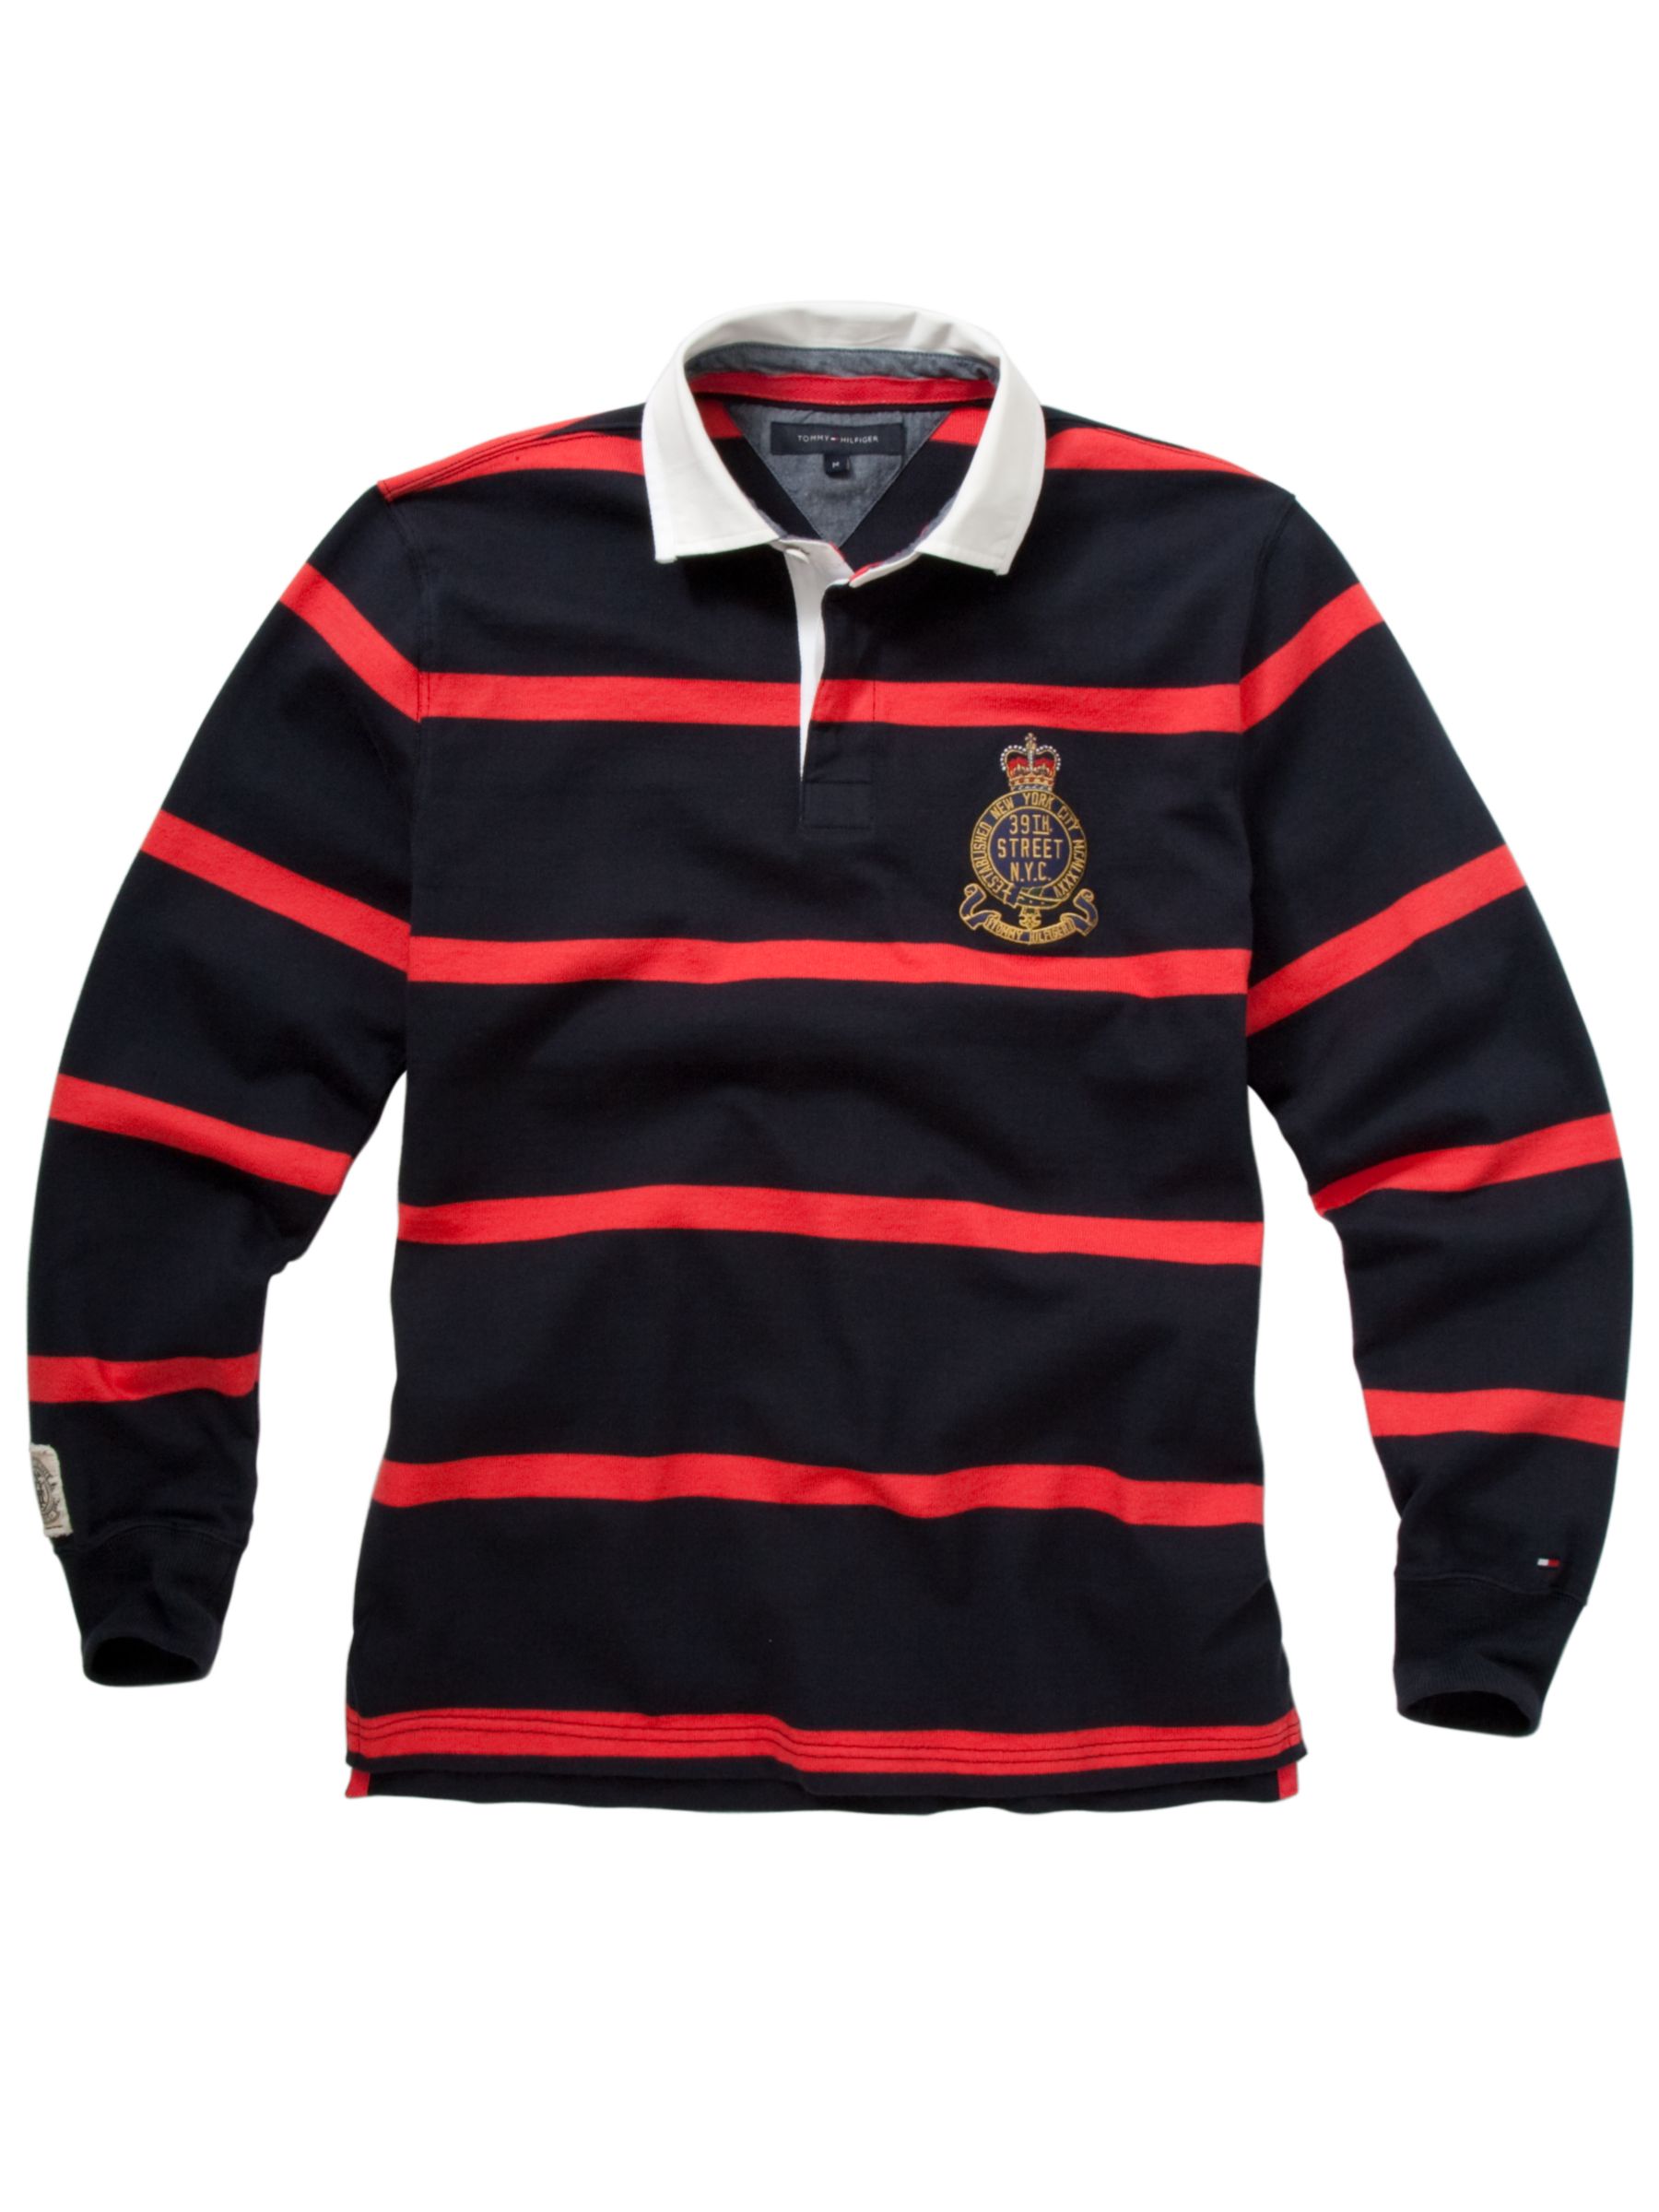 Tommy Hilfiger Pascal Rugby Shirt, Black/Coral